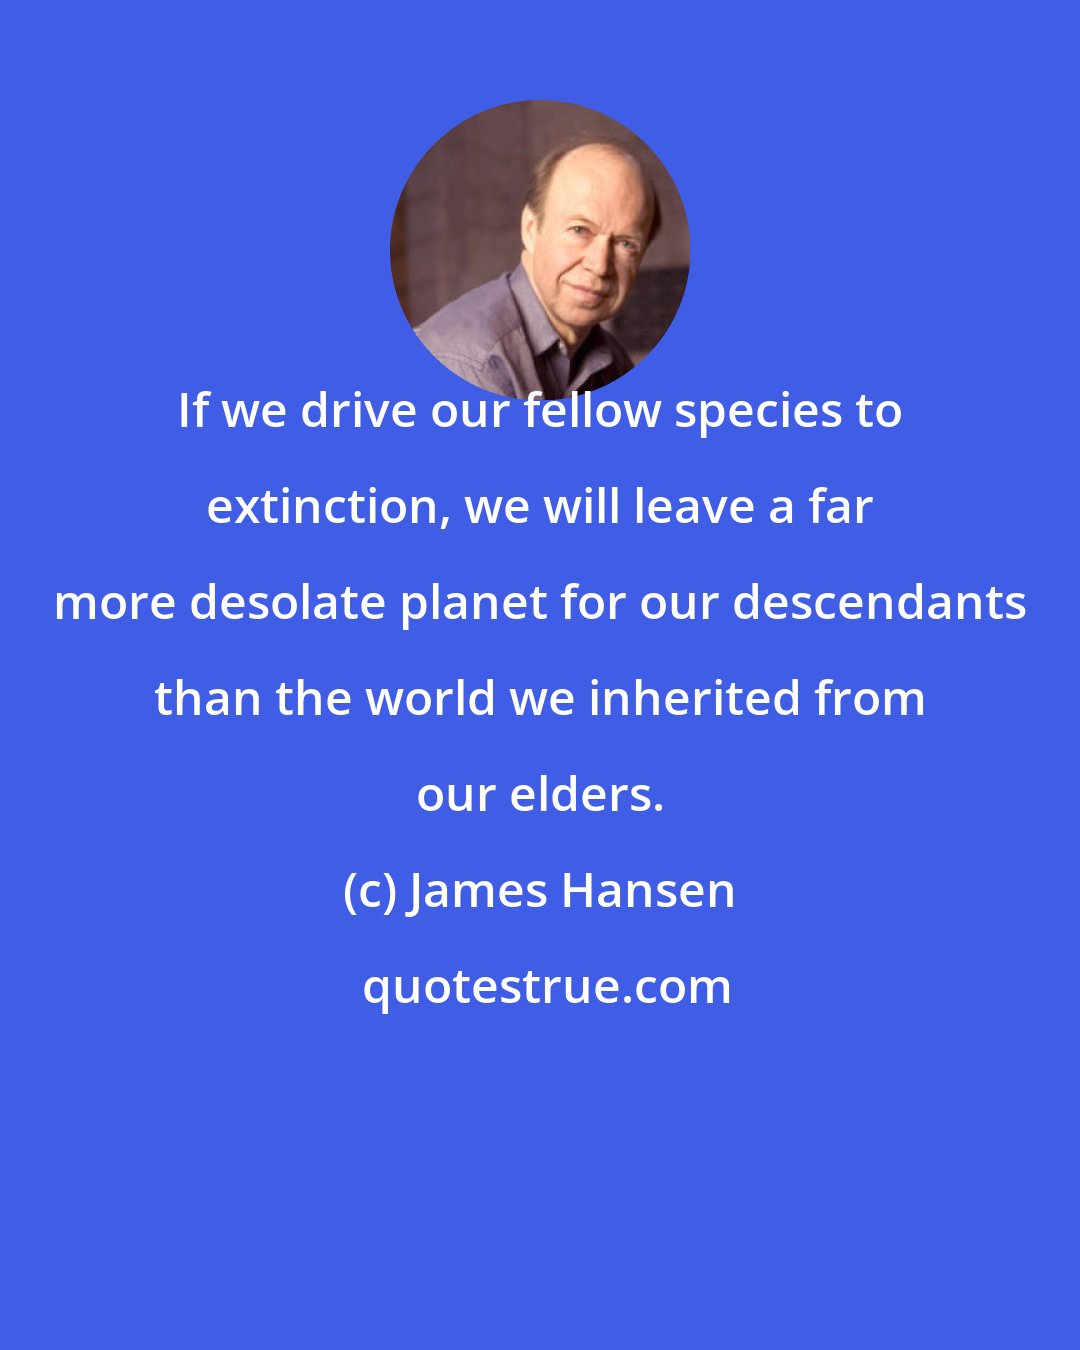 James Hansen: If we drive our fellow species to extinction, we will leave a far more desolate planet for our descendants than the world we inherited from our elders.